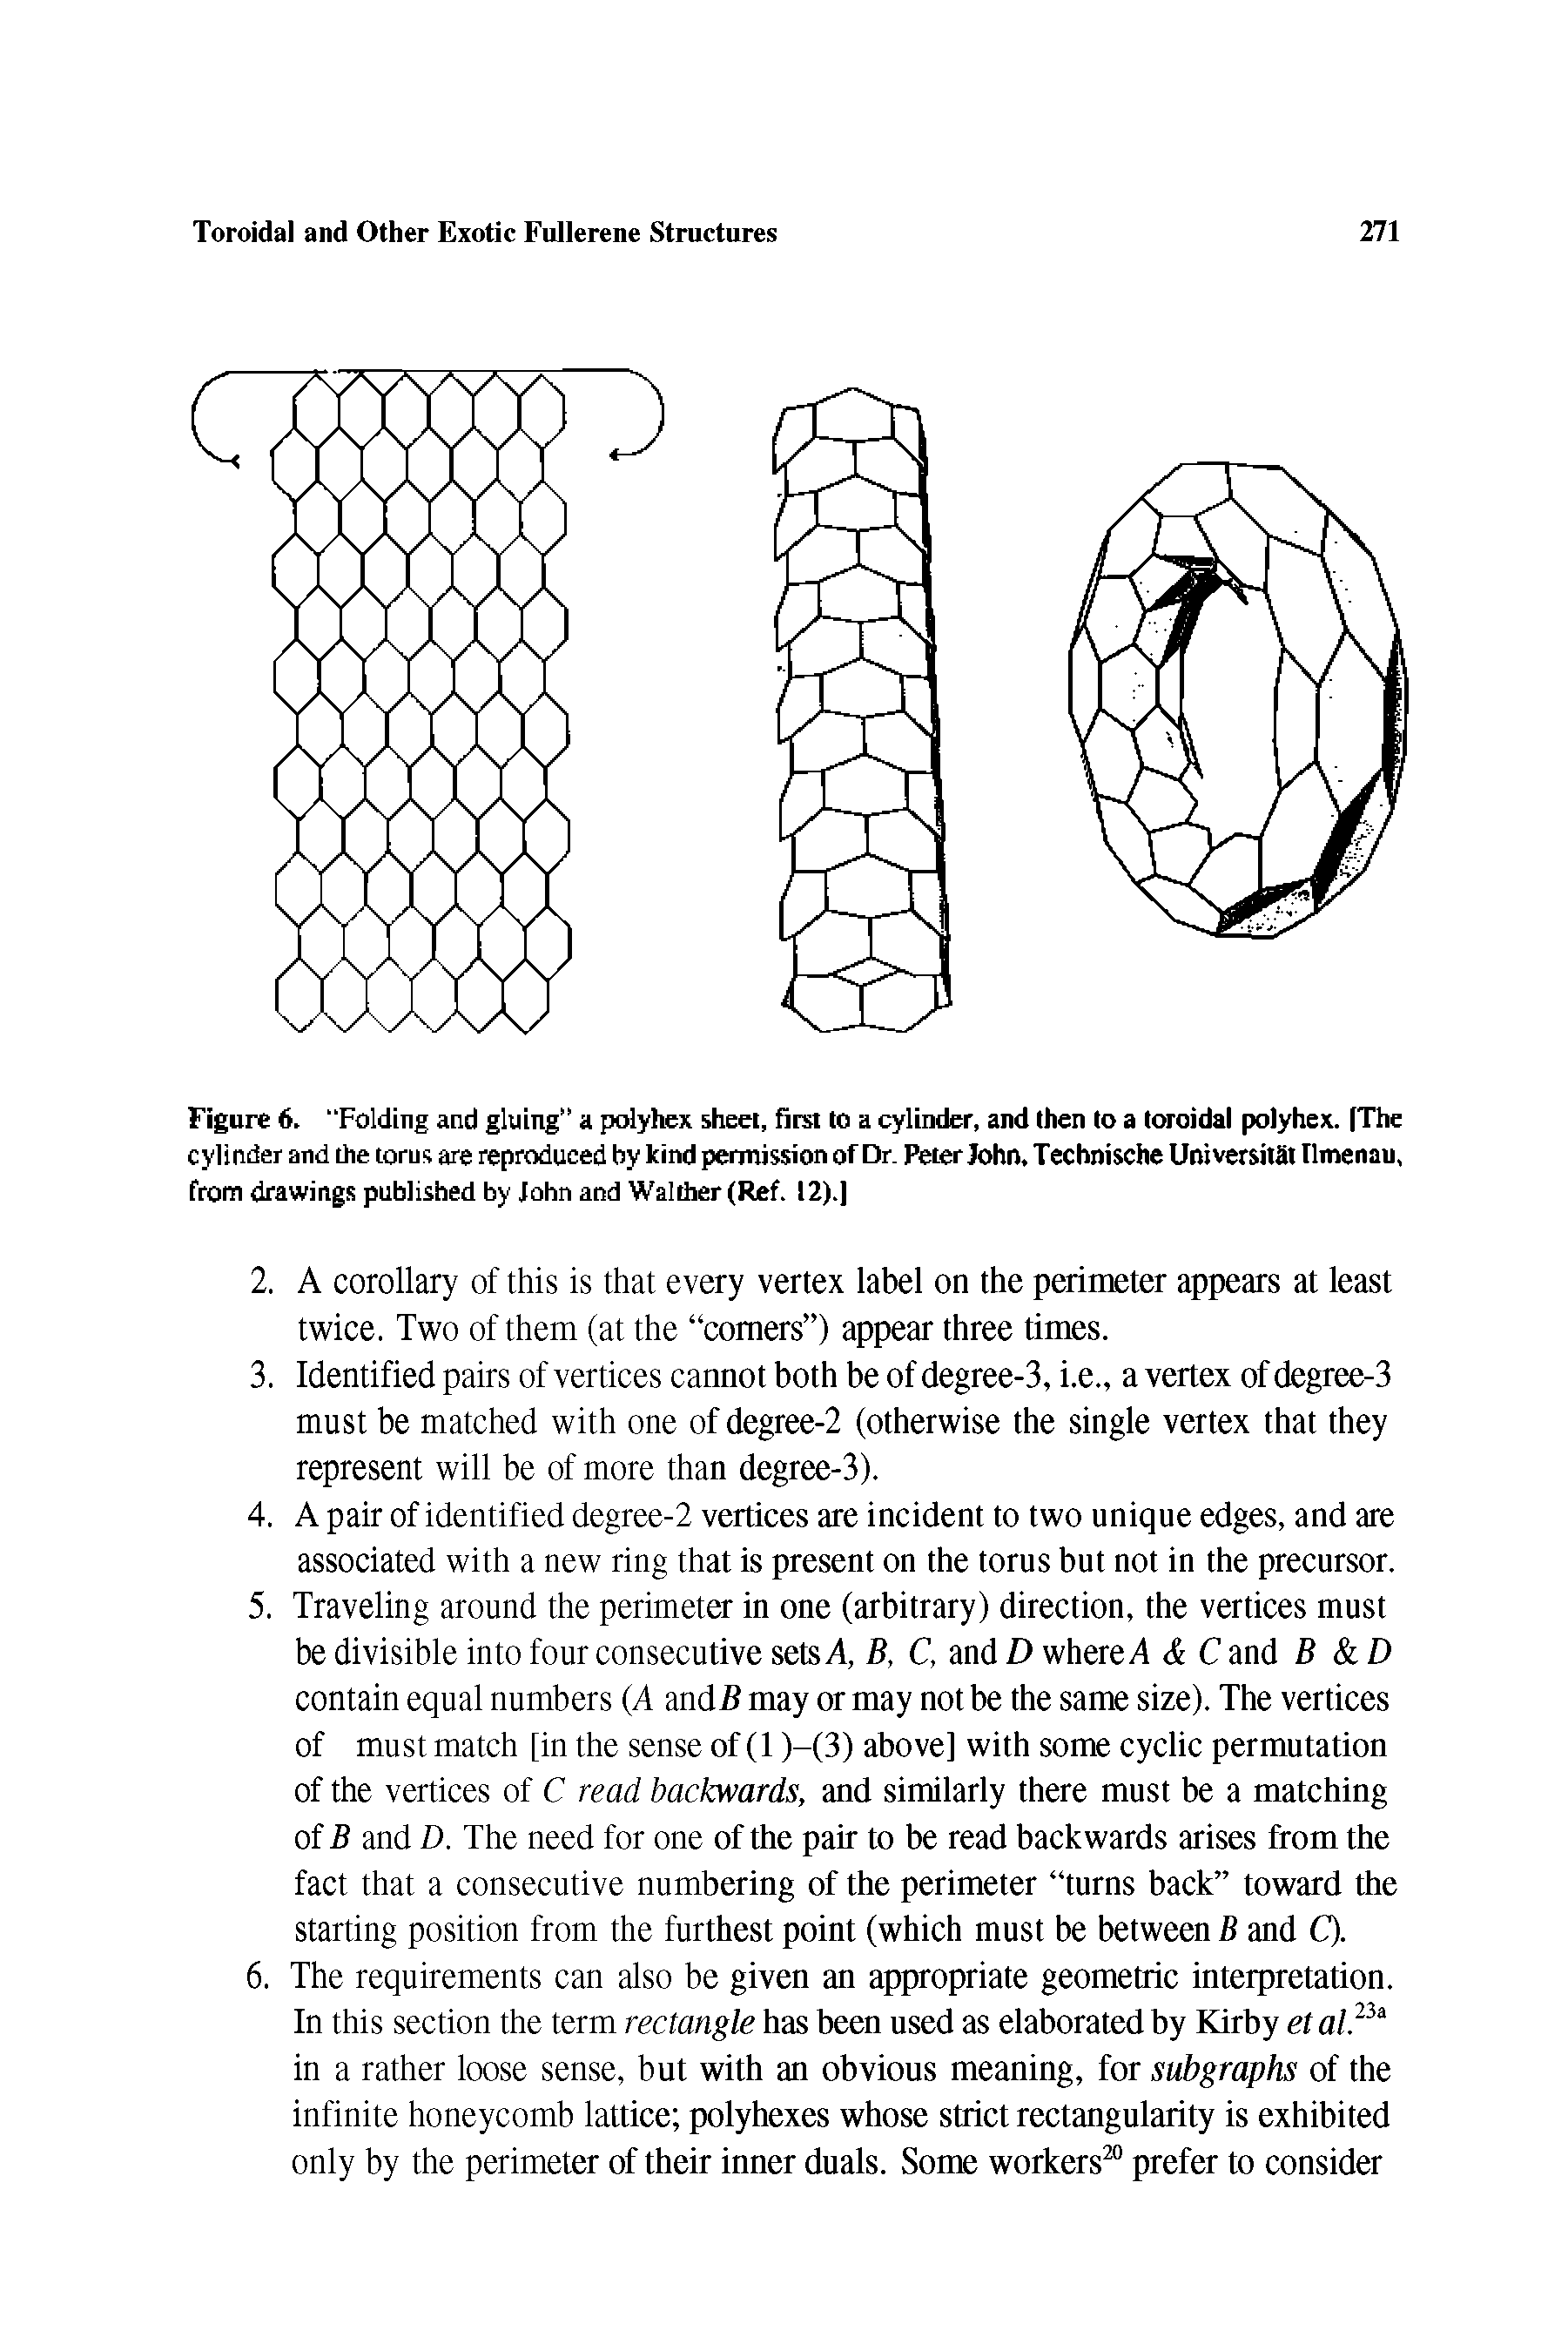 Figure 6. "Folding and gluing a polyhex sheet, first to a cylinder, and then to a toroidal polyhex. (The cylinder and the torus are reproduced by kind permission of Dr. Peter John. Technische UoiversitSt Ilmenau, from drawings published by John and WaIther(Ref. I2). ...